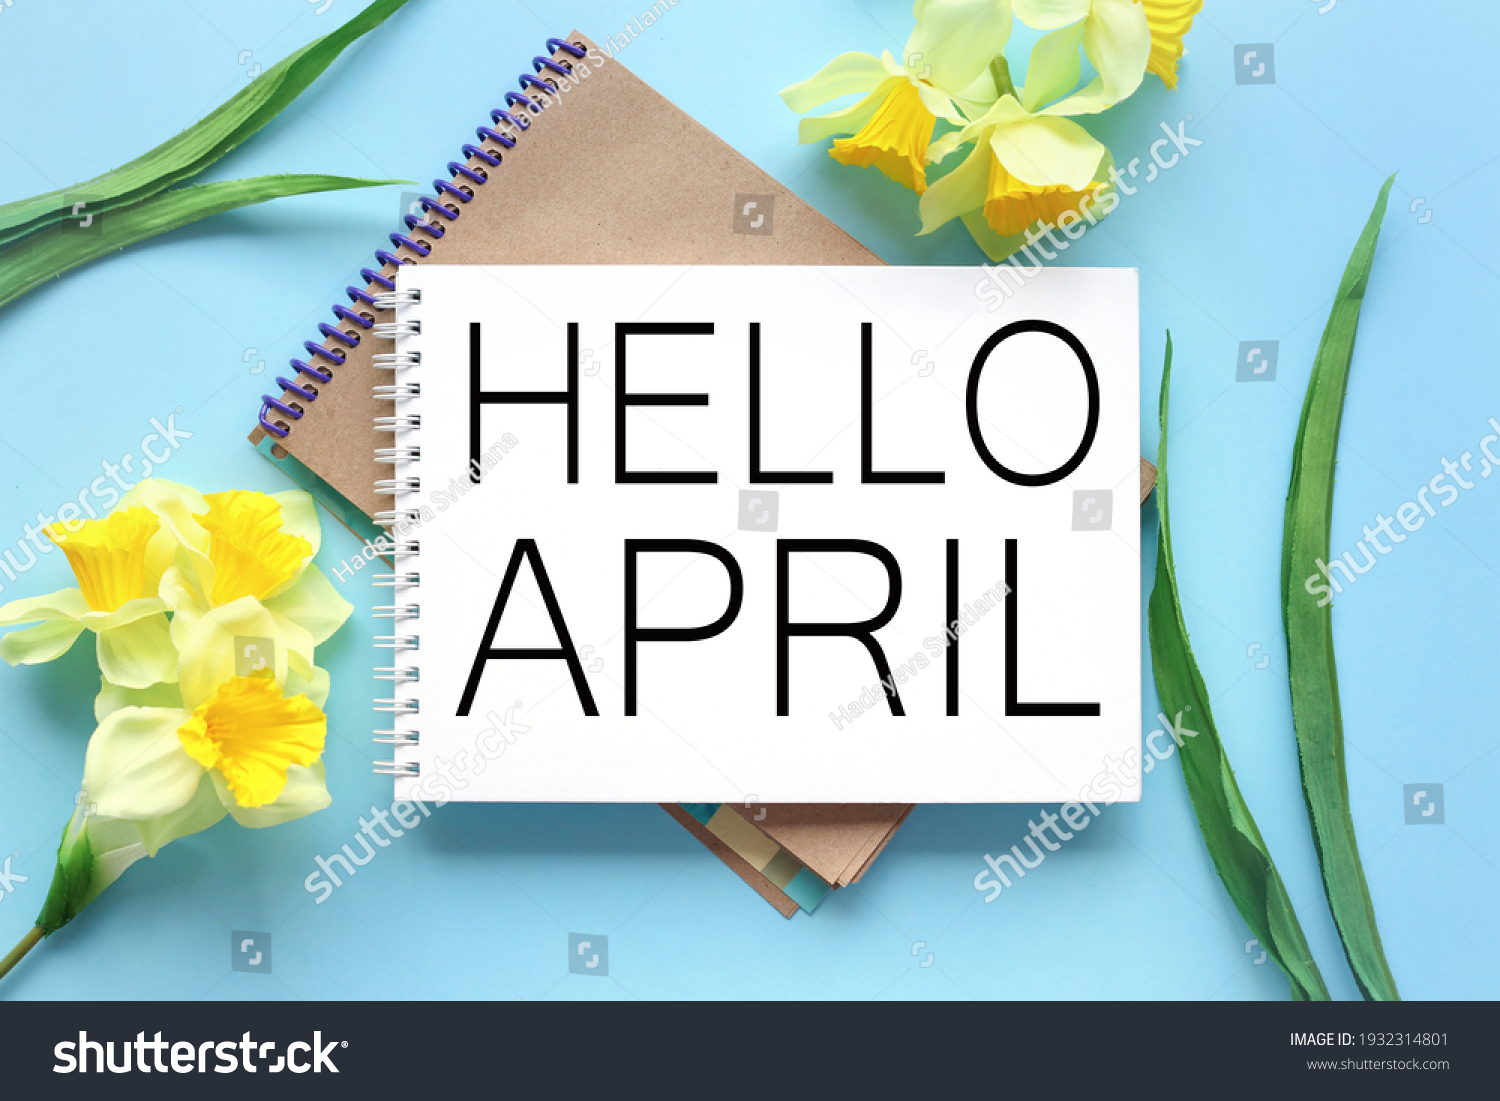 Hello April . text on white notepad paper on blue background. near notepad with yellow flowers and green leaves #1932314801